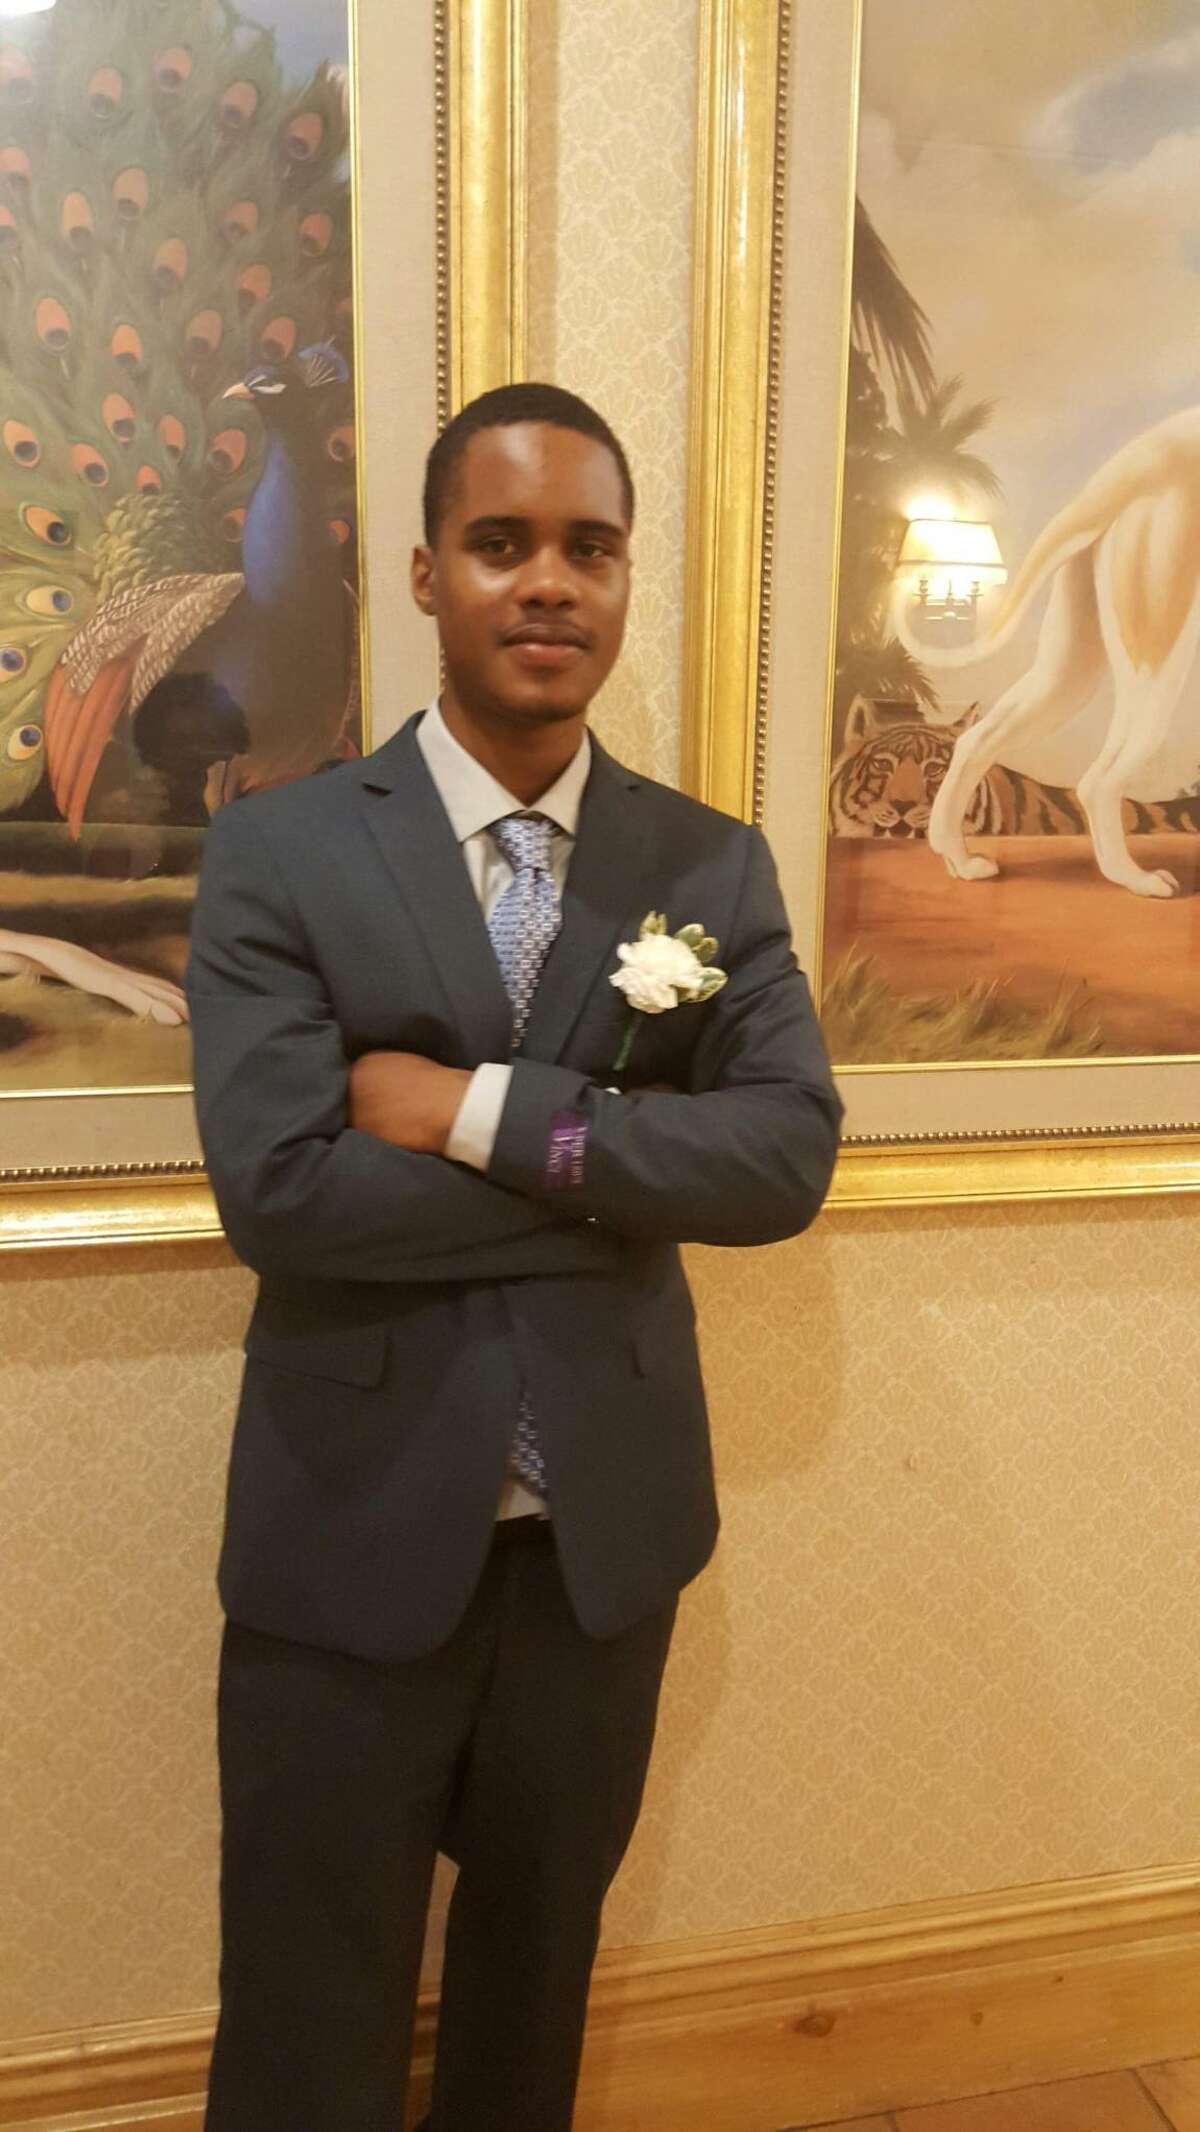 sTeven Barrier, 23, of Stamford died in police custody on Oct. 23, 2019 on his birthday.